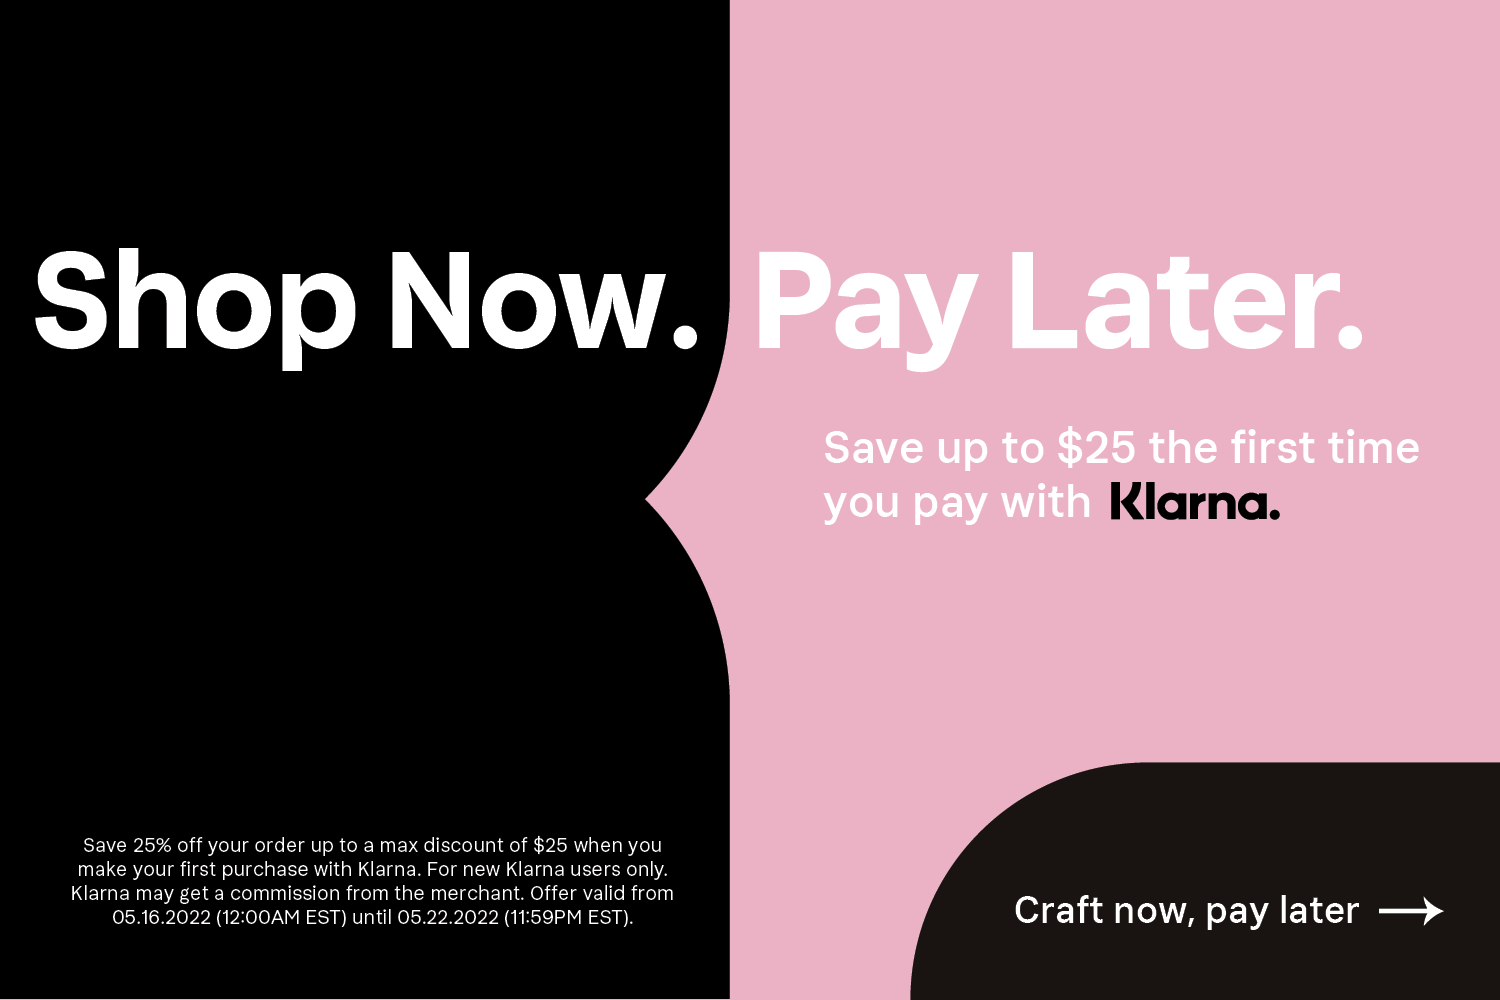 Shop Now. Pay Later. Save up to $25 the first time you pay with Klarna. Restrictions apply. CRAFT NOW, PAY LATER.